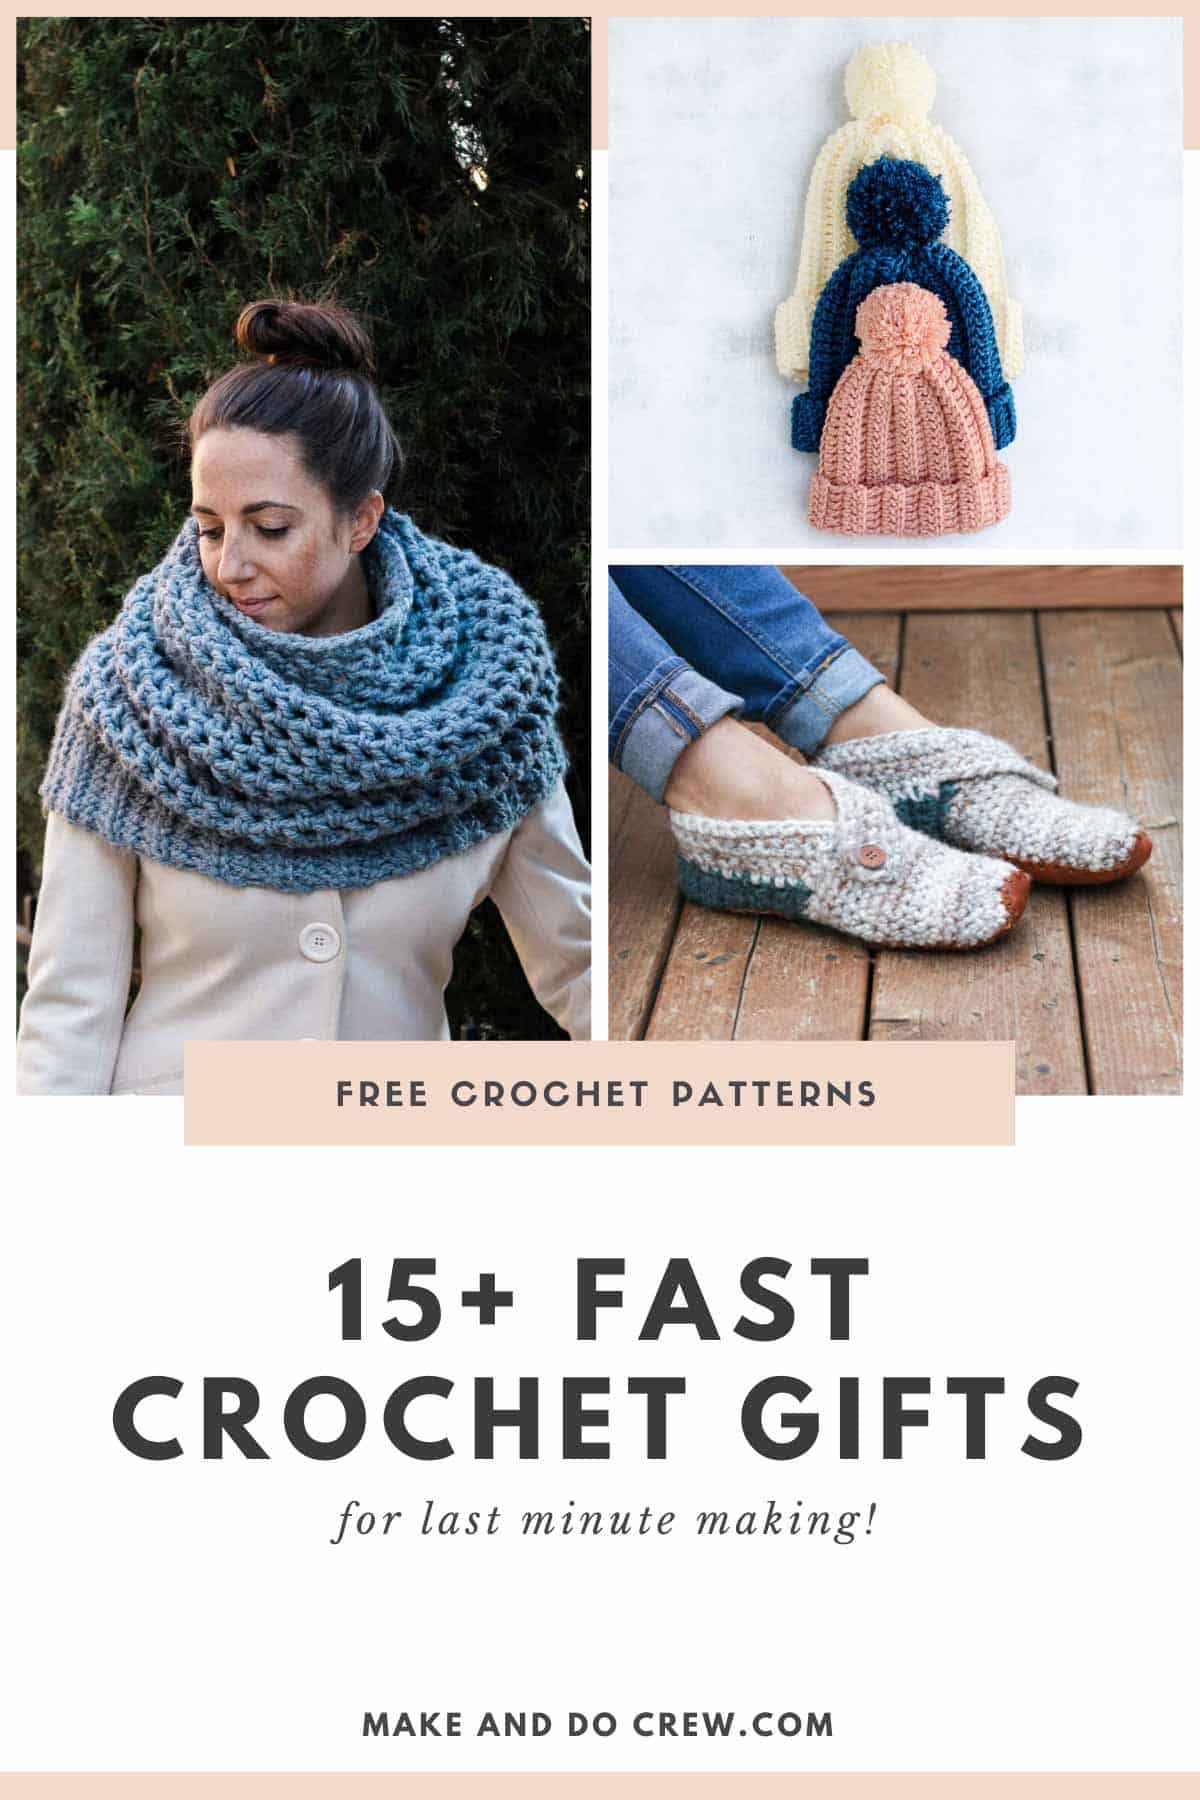 A grid of fast crochet patterns that are easy to make for Christmas, baby shower or birthday gifts.